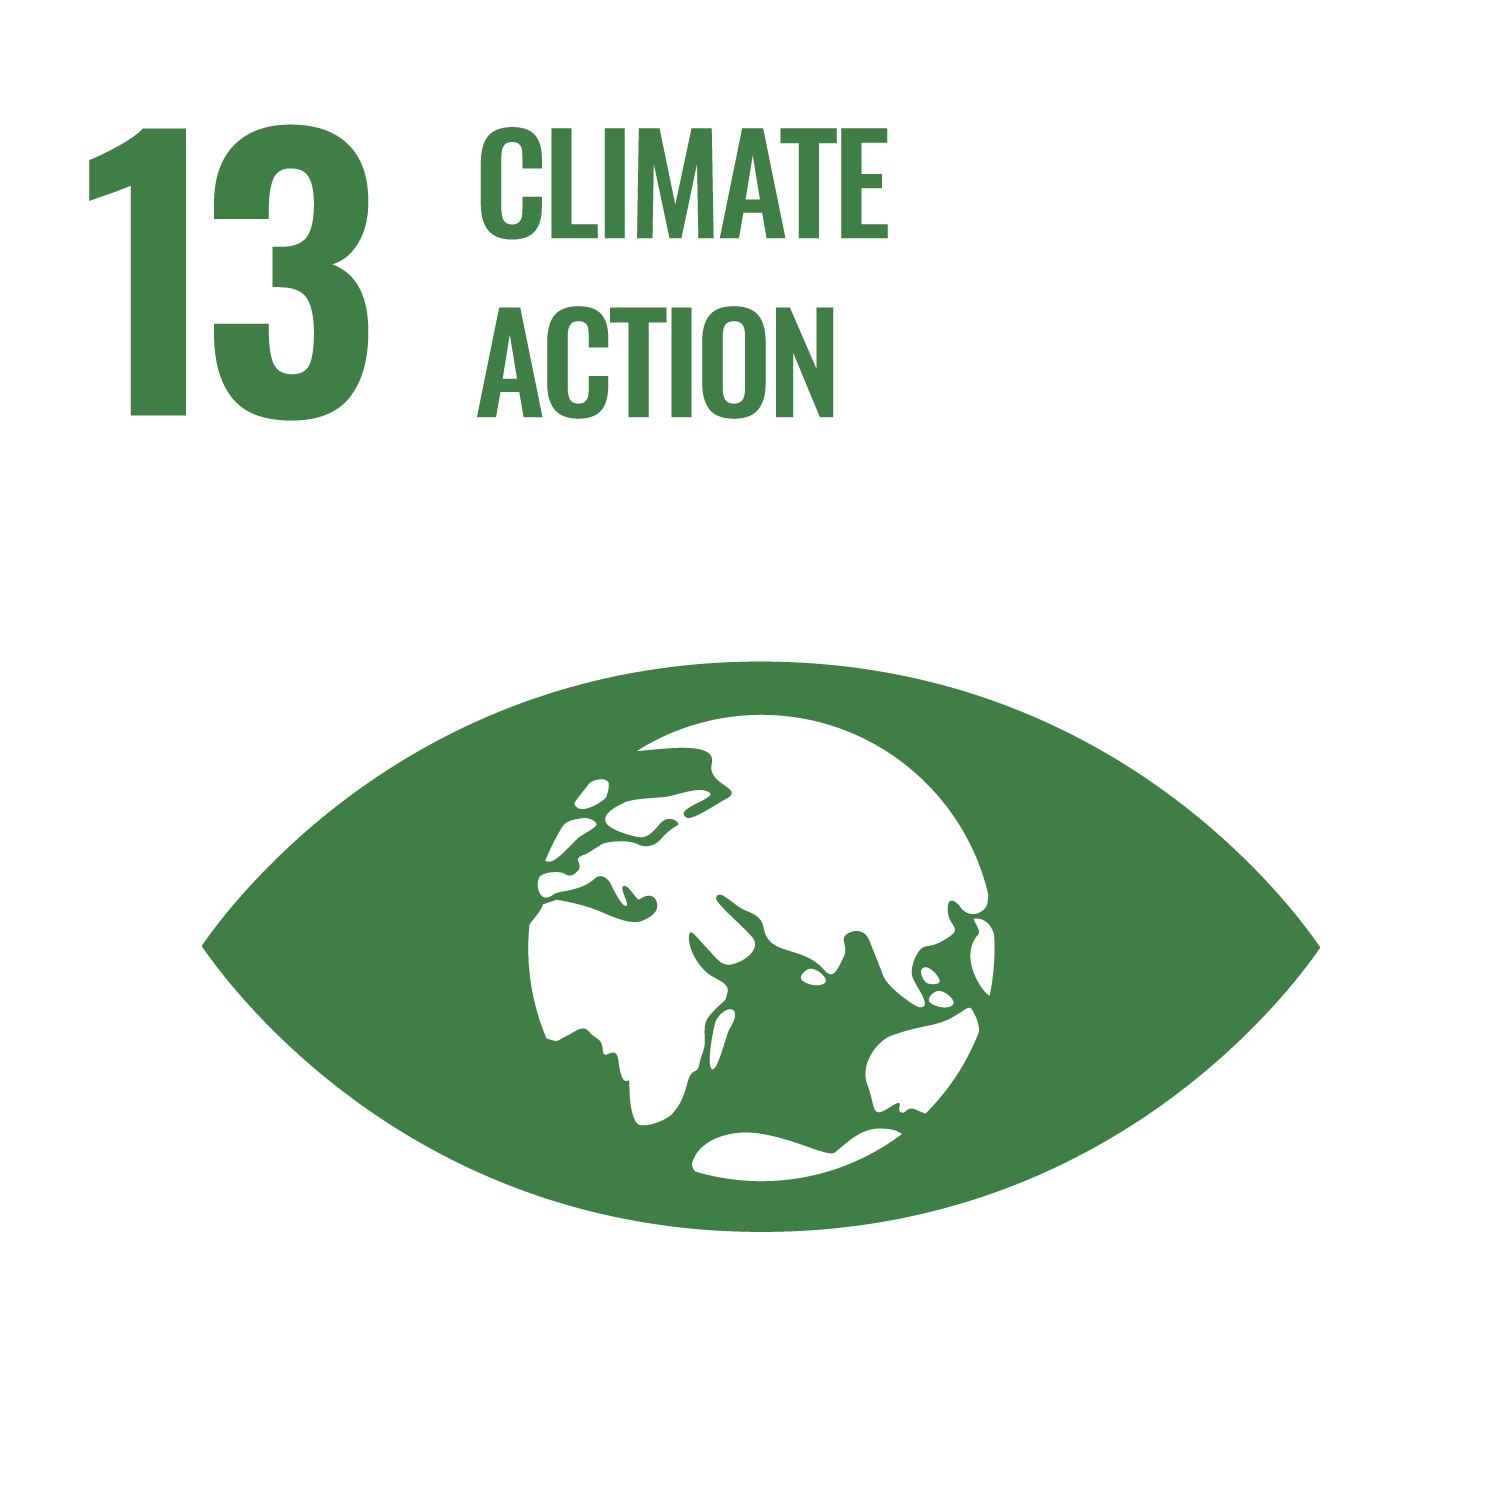 Goal 13: Take urgent action to combat climate change and its impacts